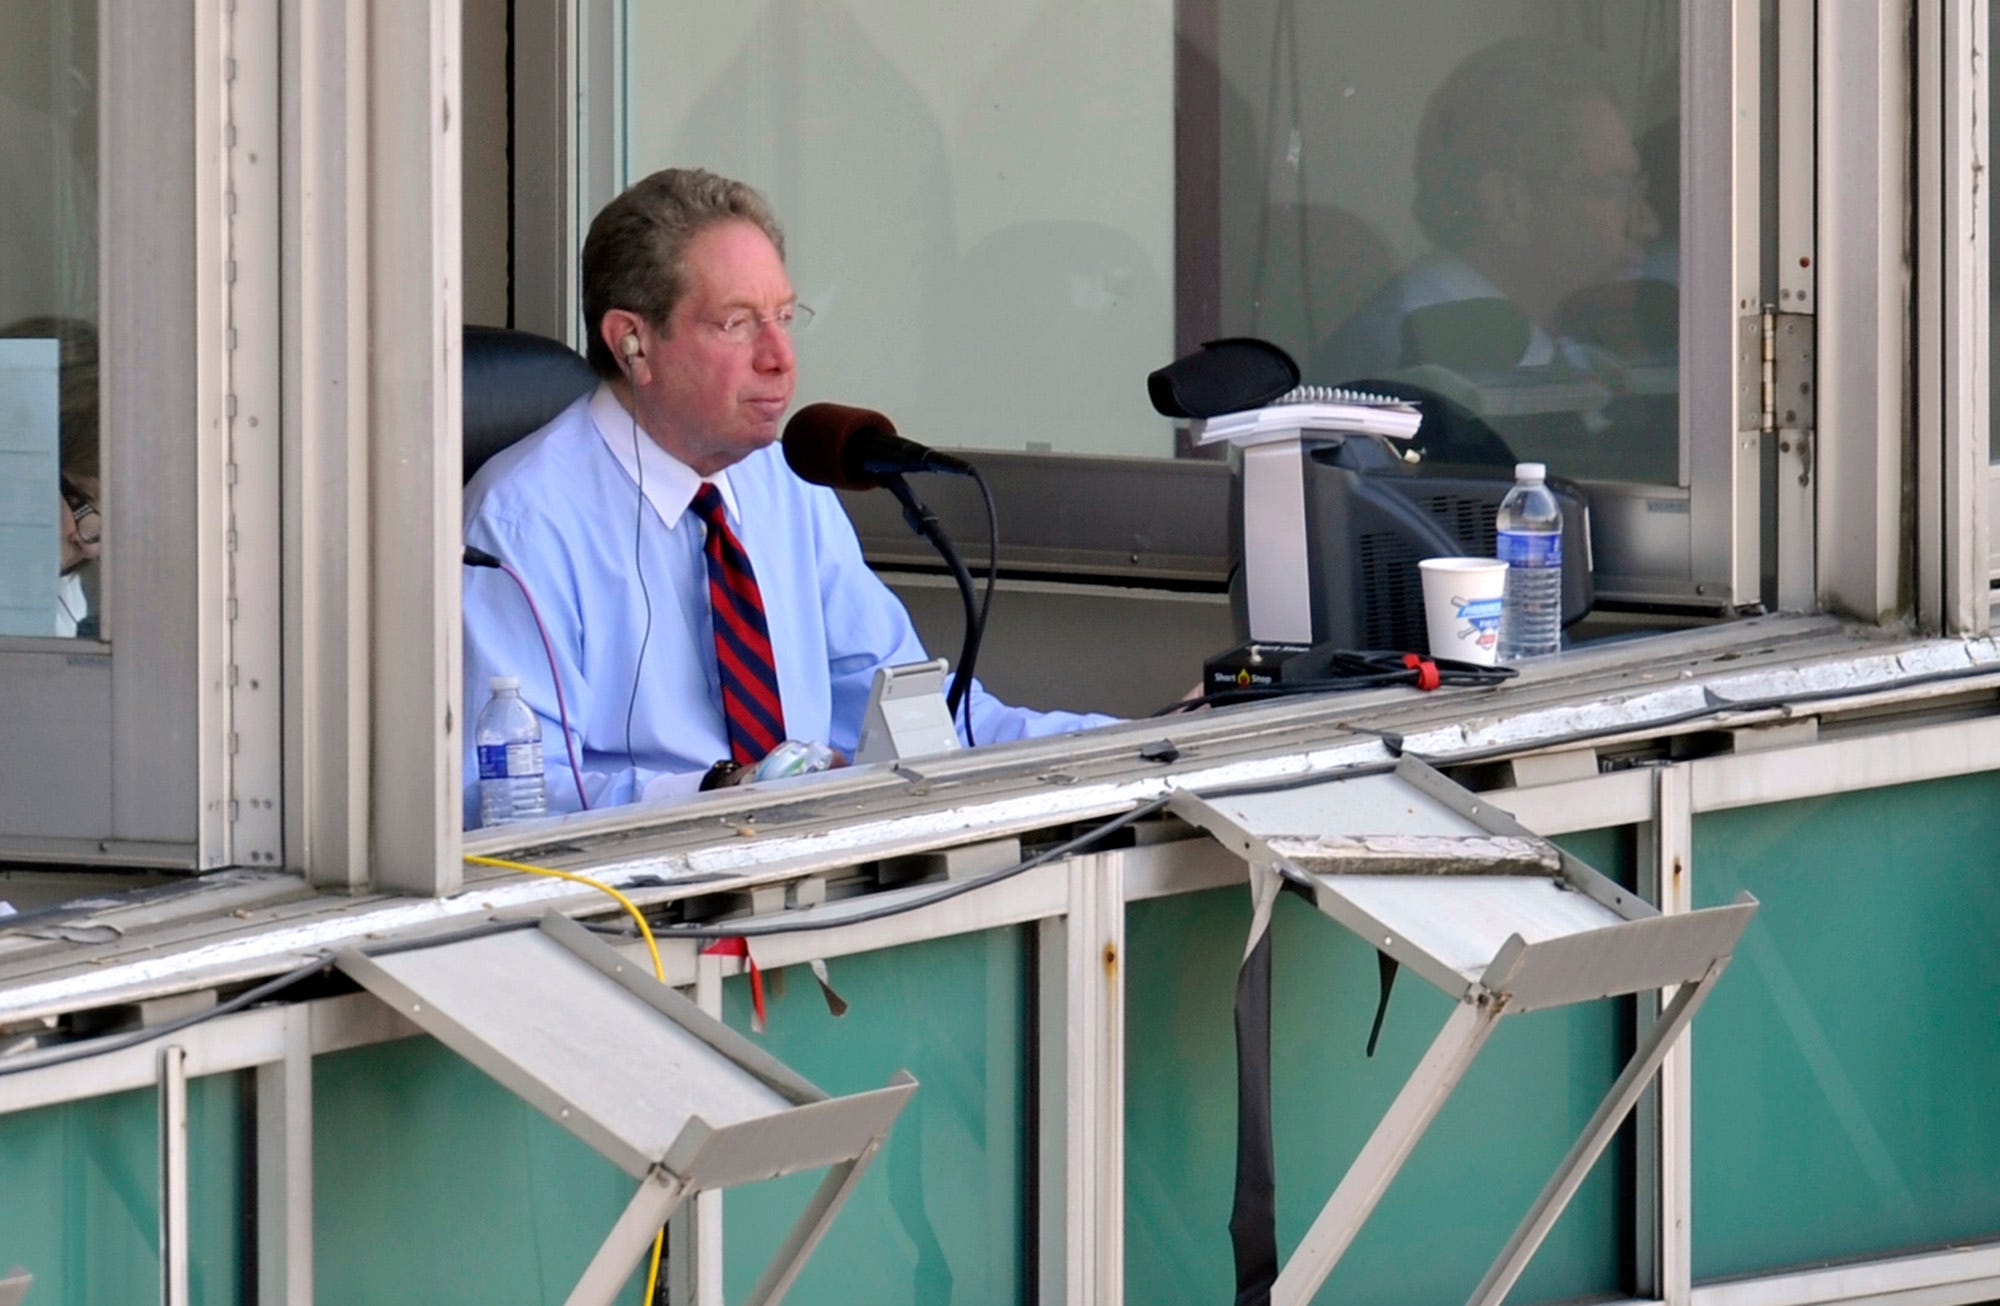 retired yankees announcer john sterling was so much more than a friendly voice on the radio